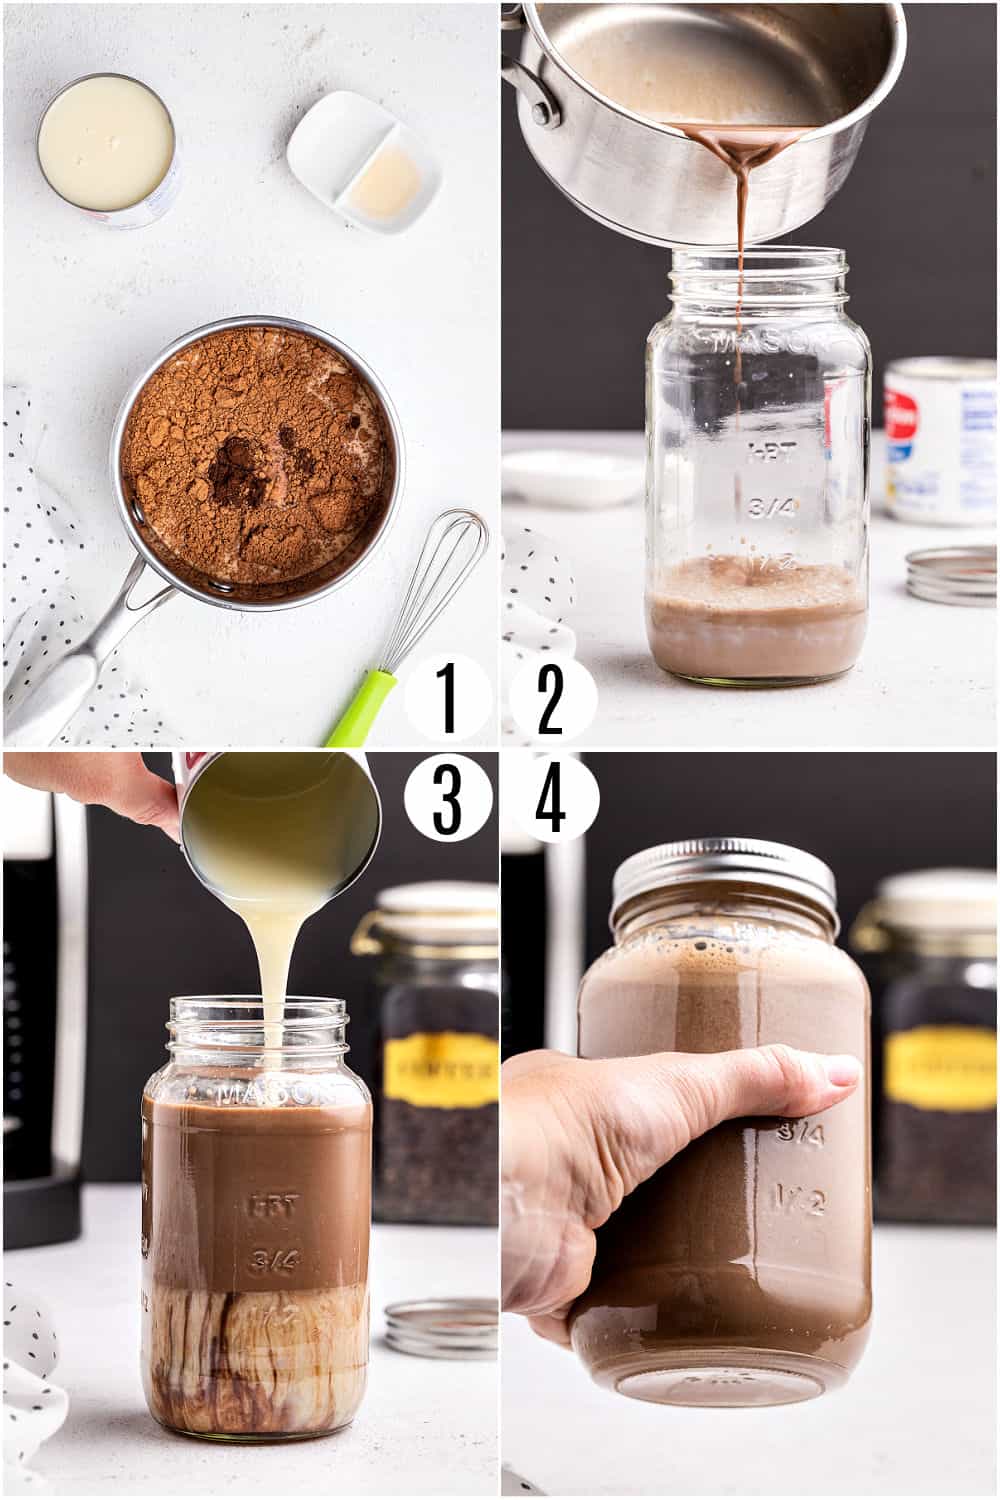 Step by step photos showing how to make irish coffee creamer.